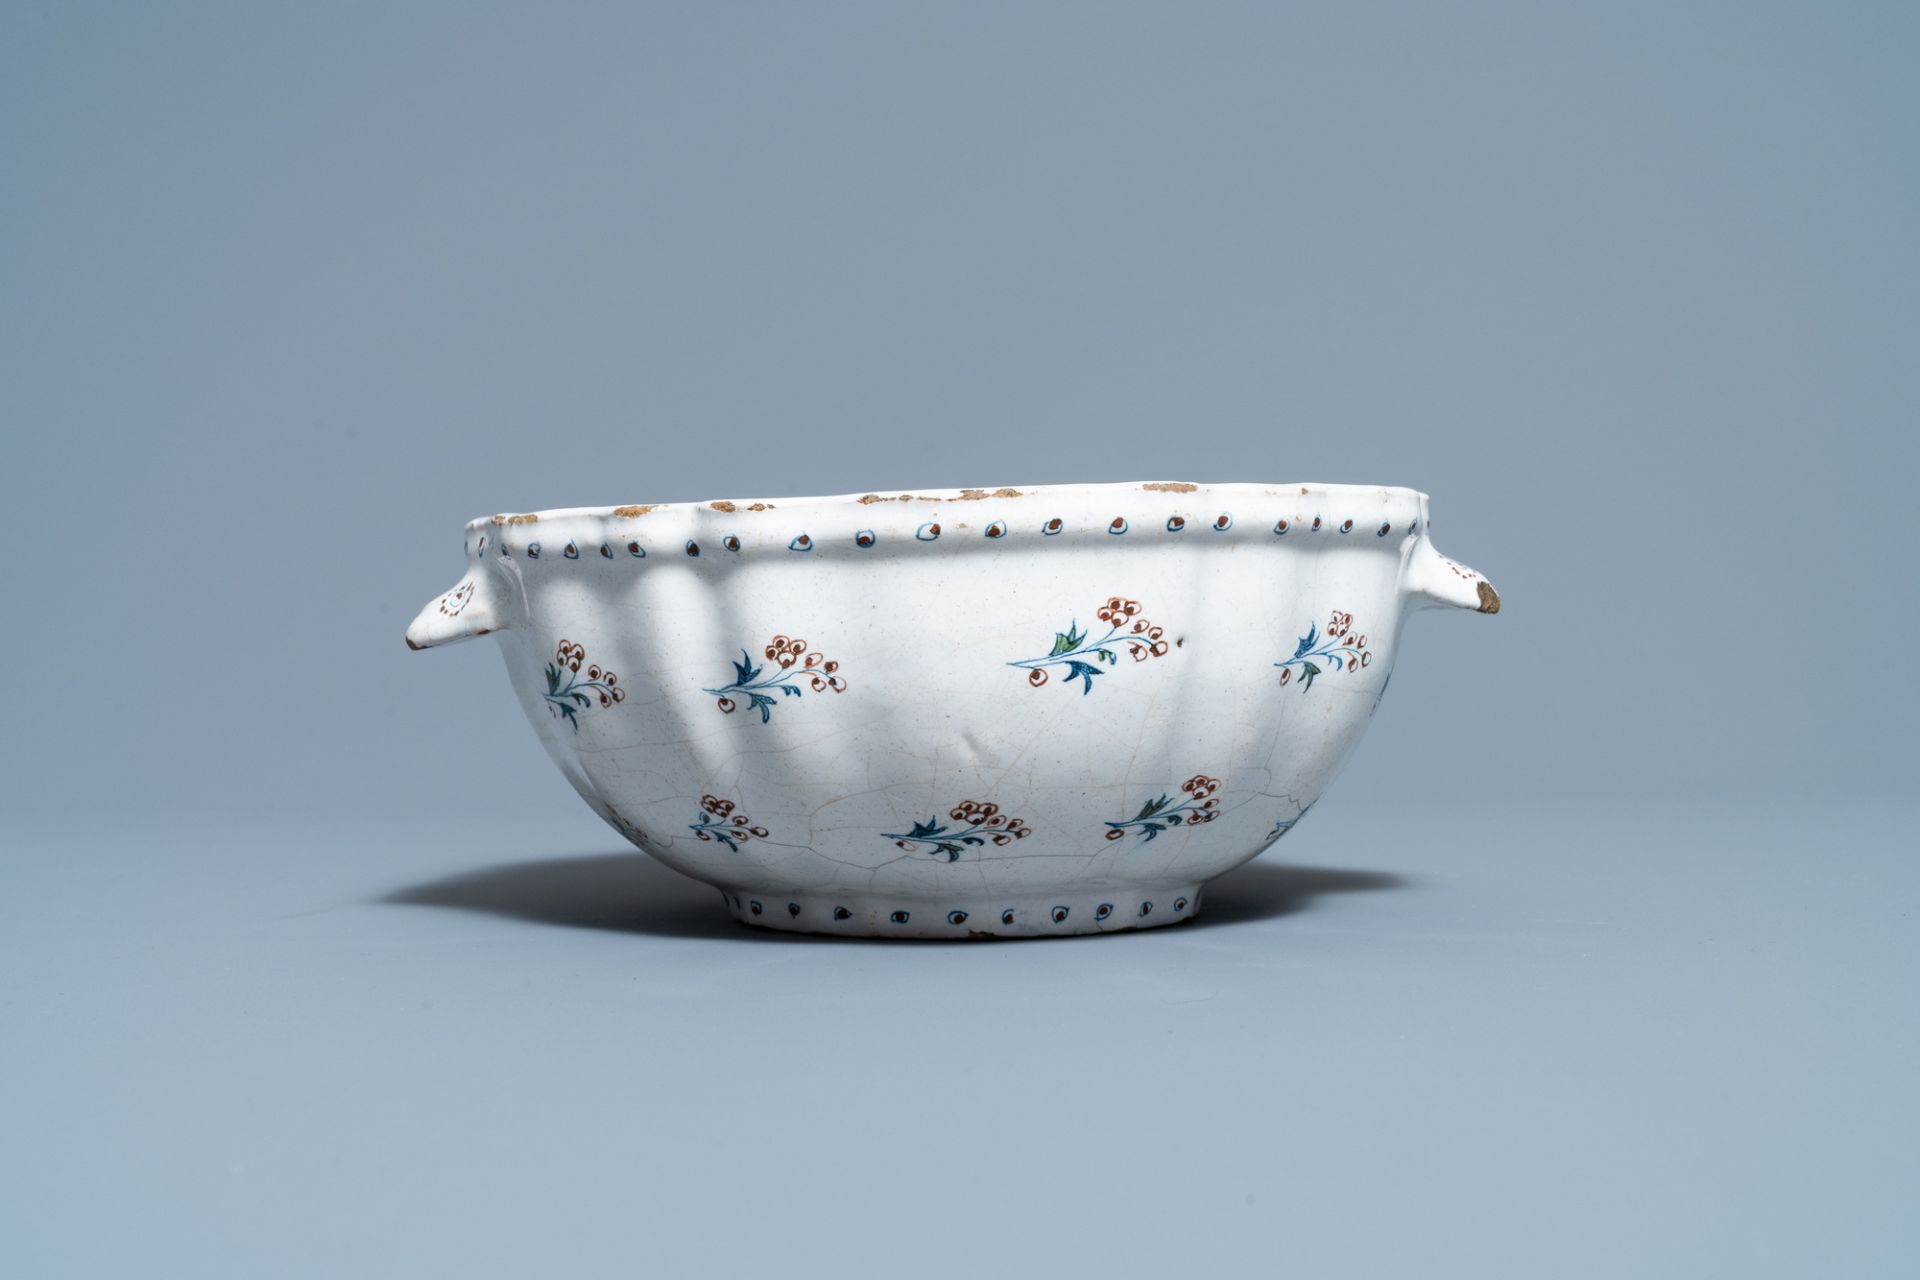 A Brussels faience basin with 'a la haie fleurie' design, 18th C. - Image 2 of 7